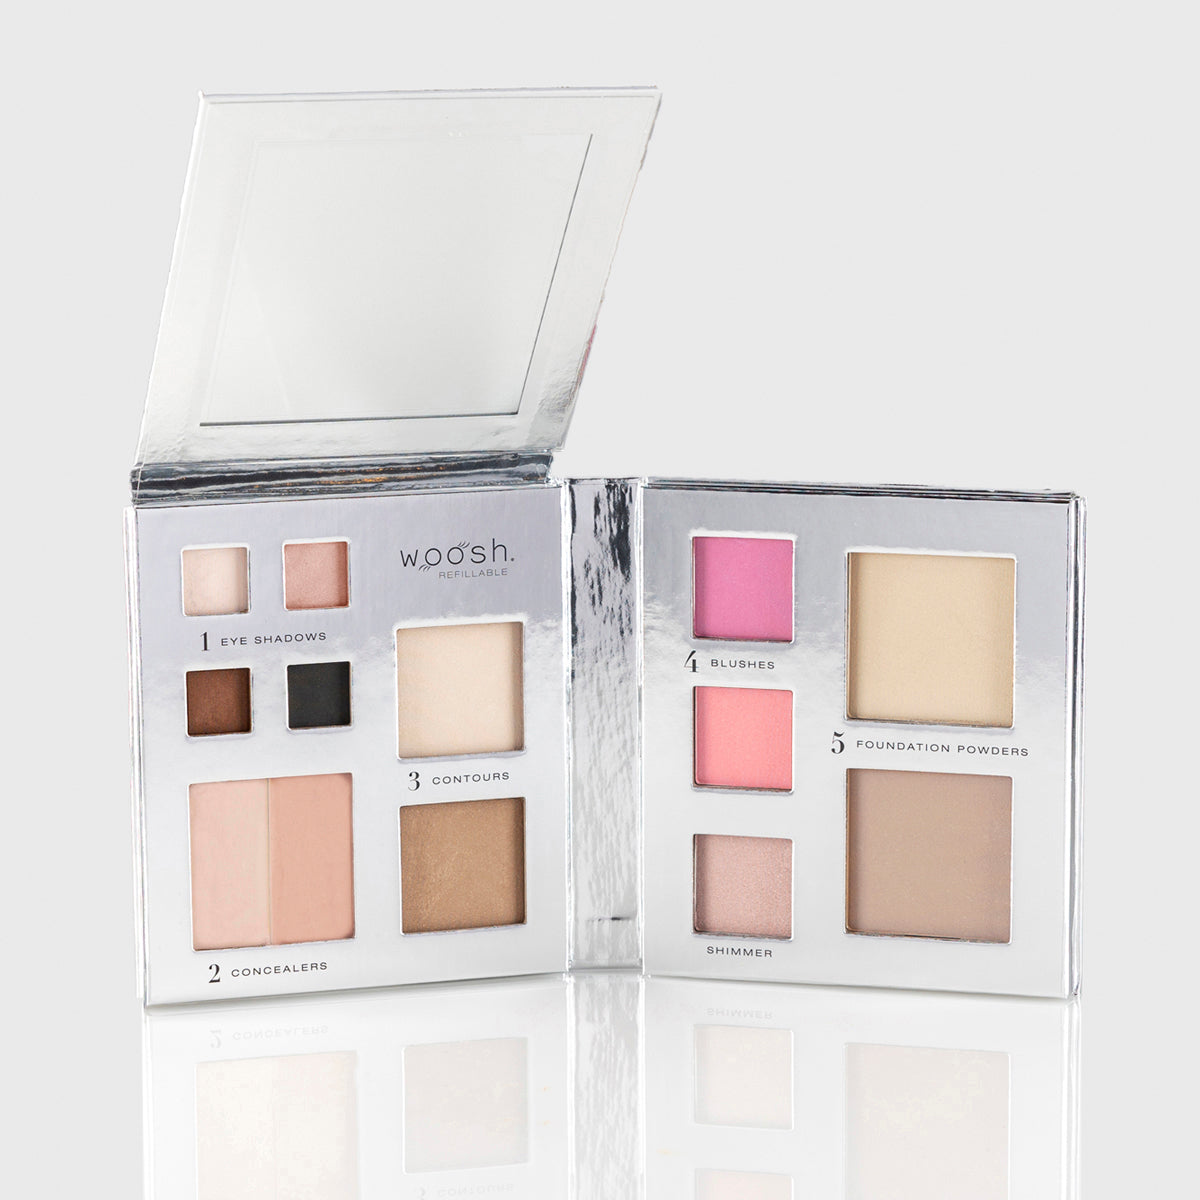 Woosh Beauty - Full face makeup palettes & more made easy